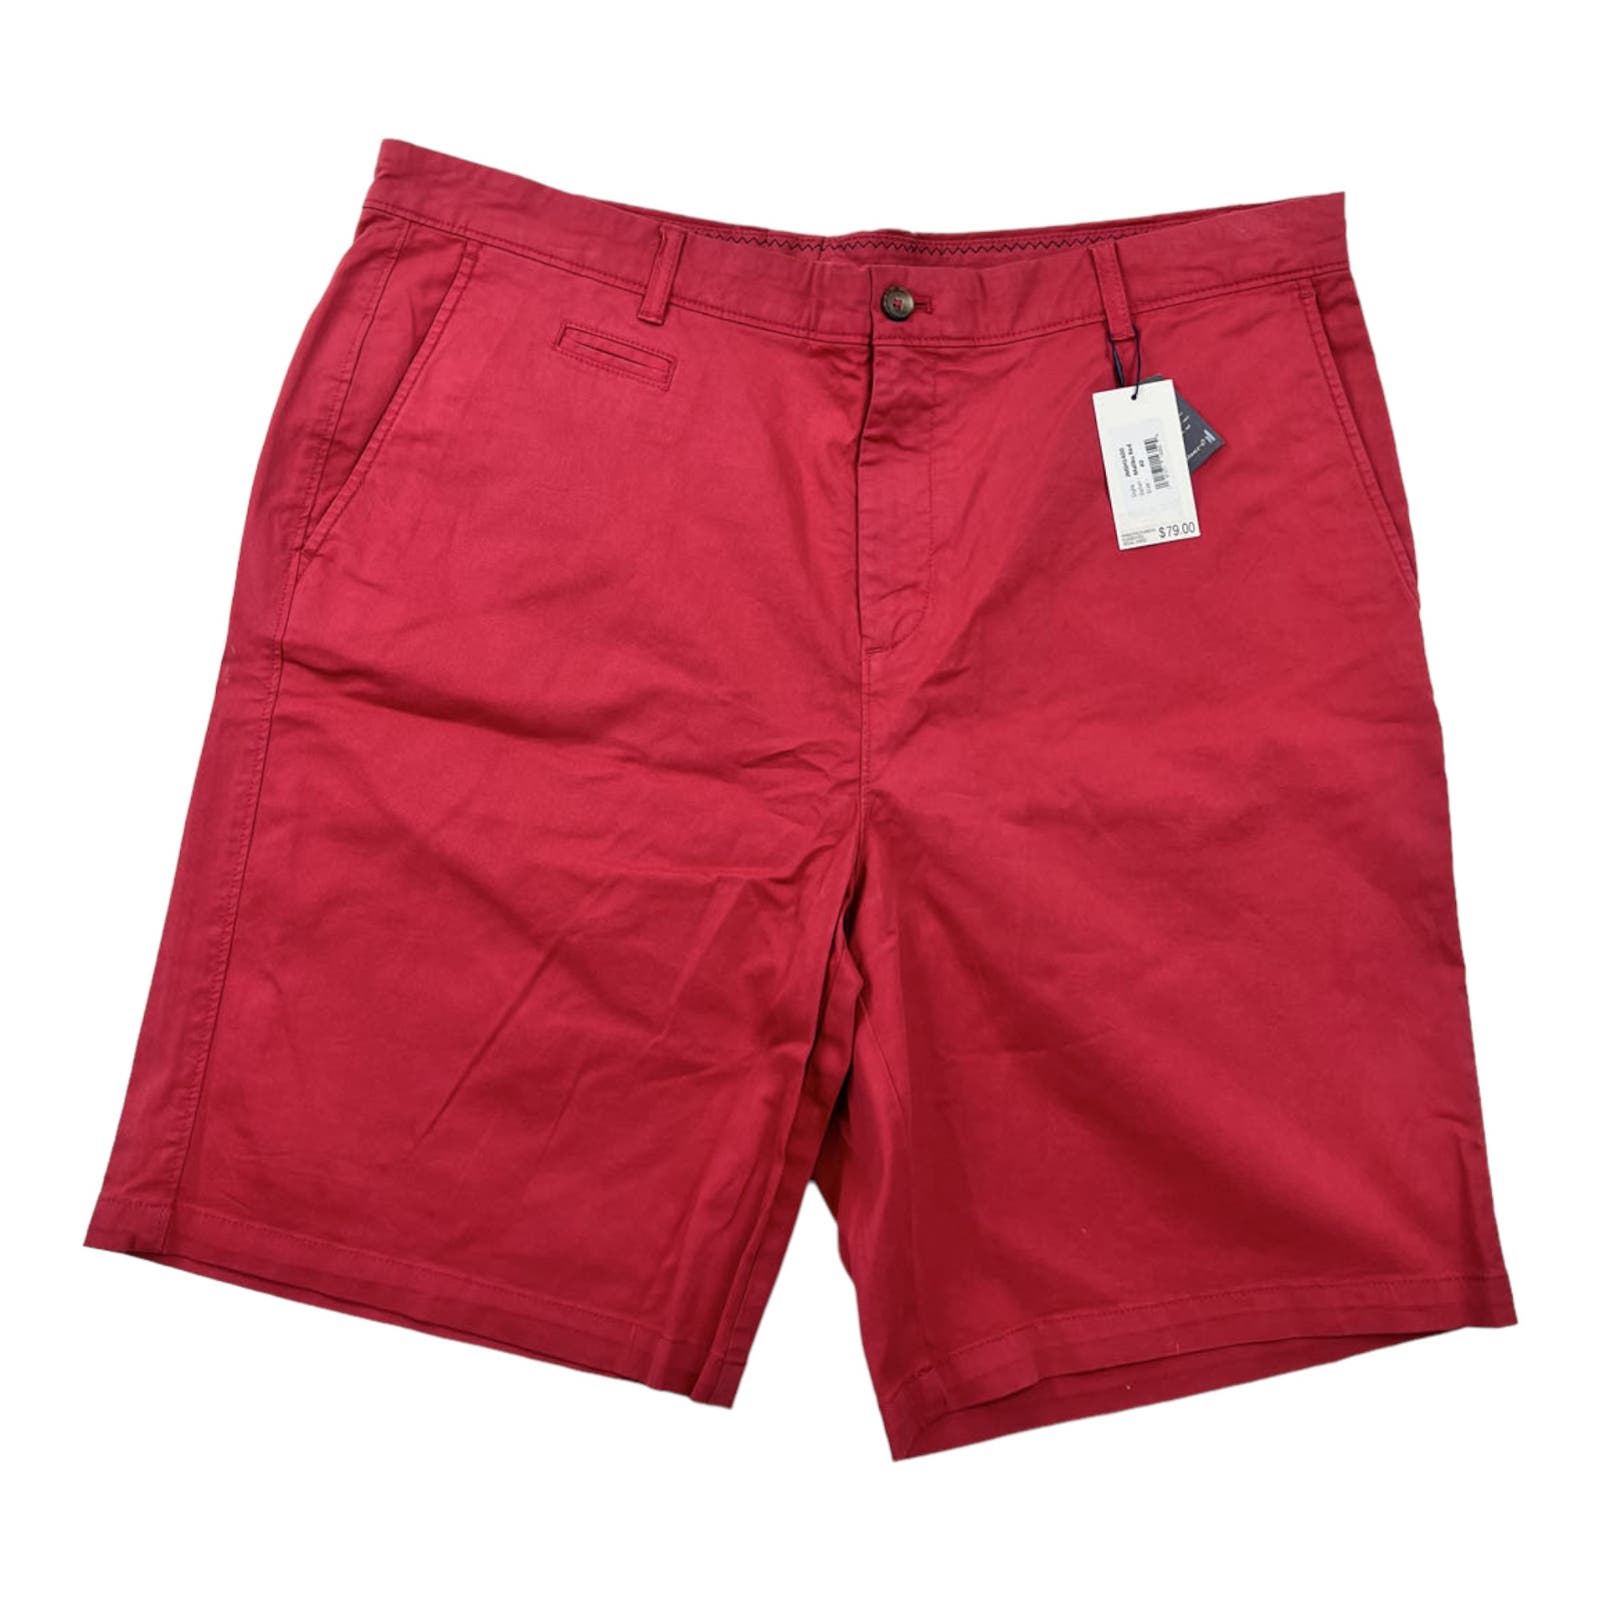 Johnnie-O Men Red Chinos Shorts US 40 Classic Fit Cotton